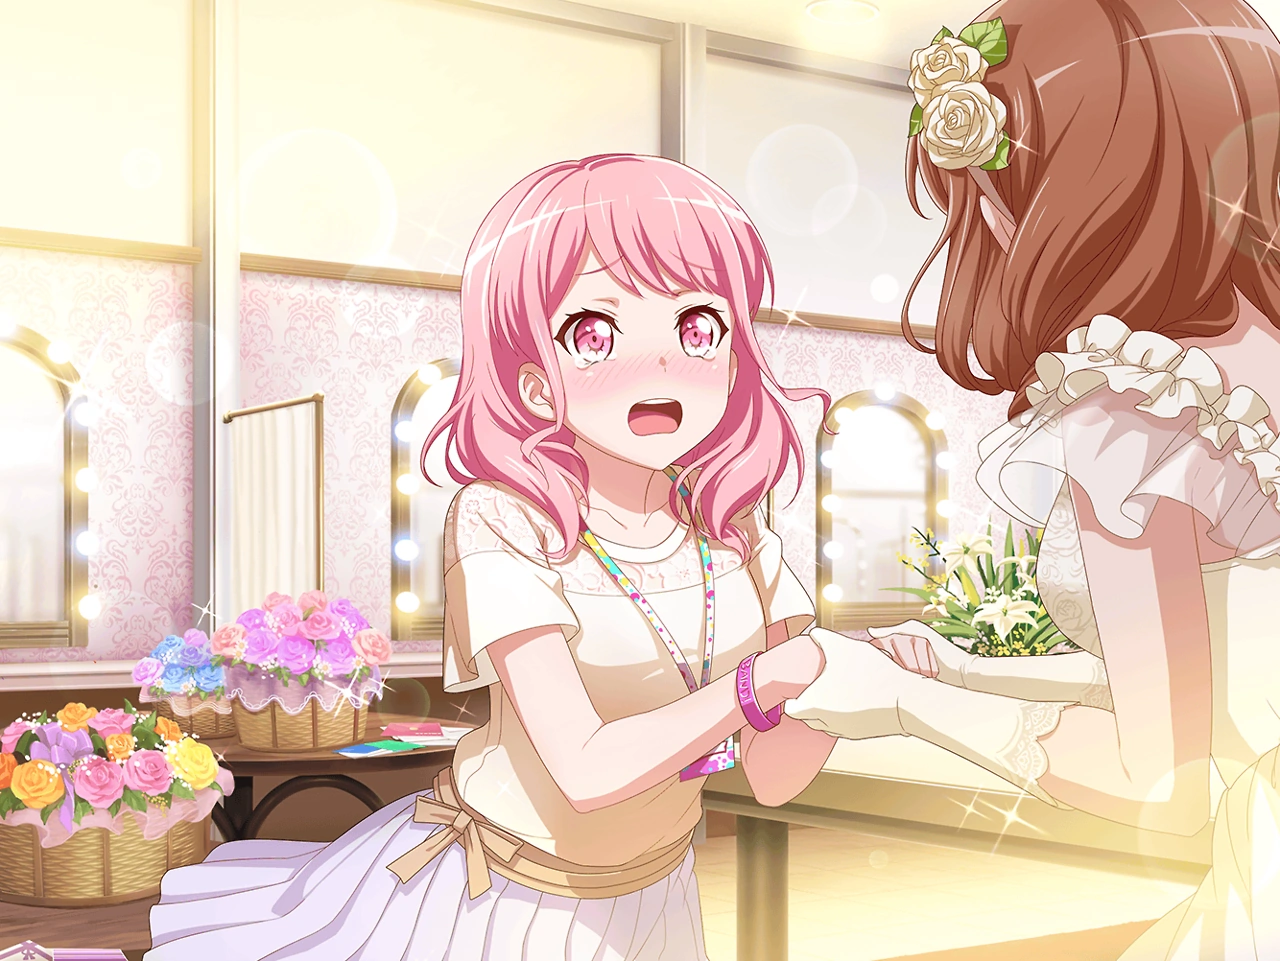 A CG of Aya tearfully holding hands with her idol.